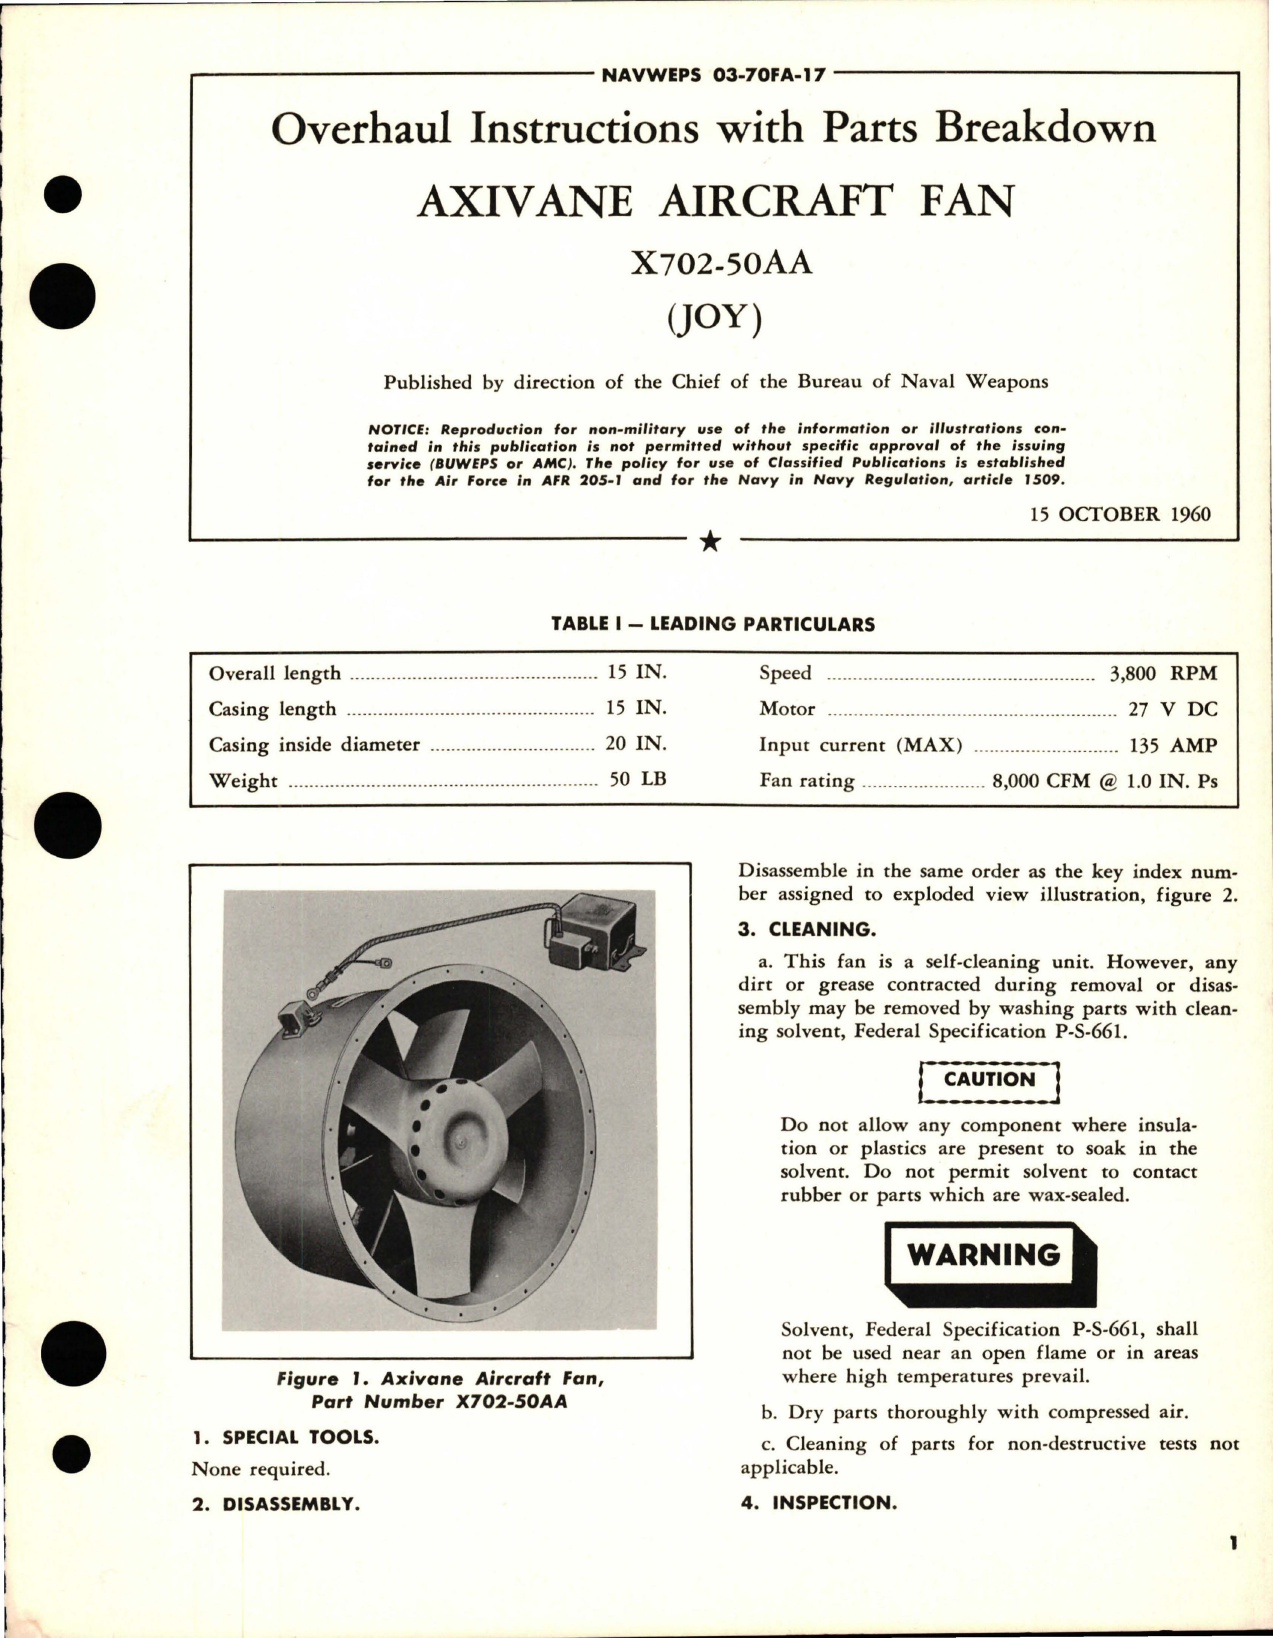 Sample page 1 from AirCorps Library document: Overhaul Instructions with Parts Breakdown for Axivane Aircraft Fan - X702-50AA 